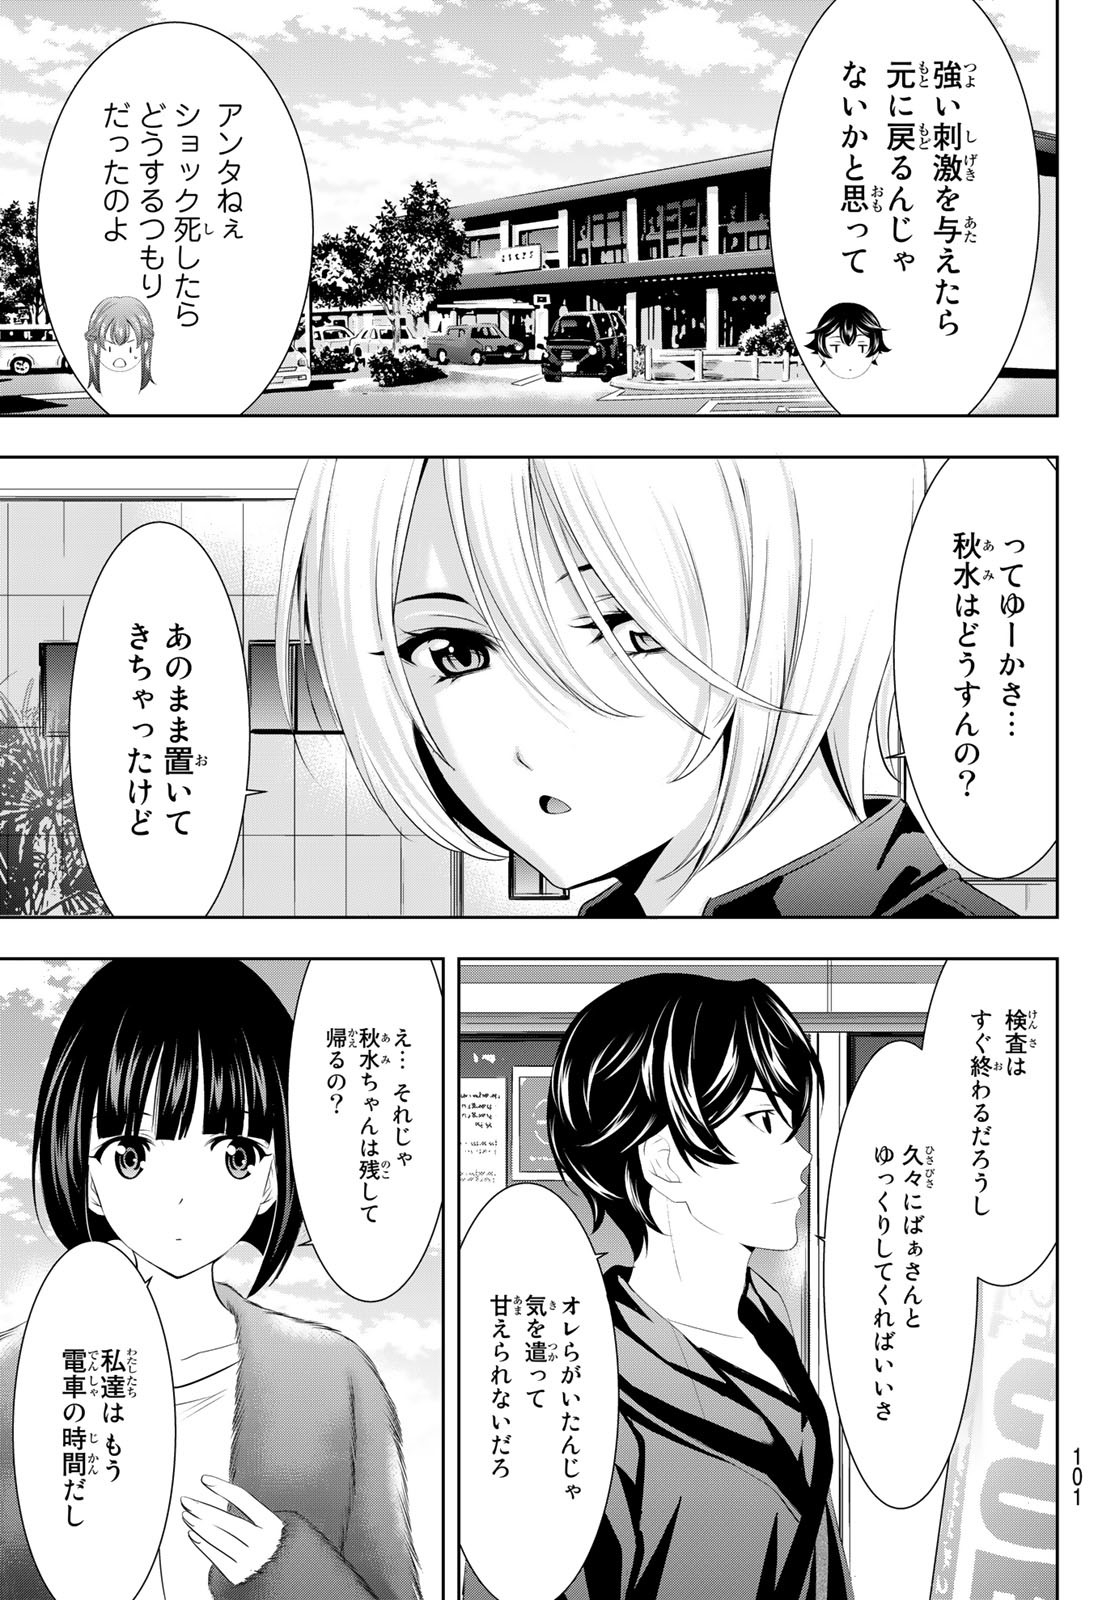 Megami no Cafe Terace - Chapter 62 - Page 16